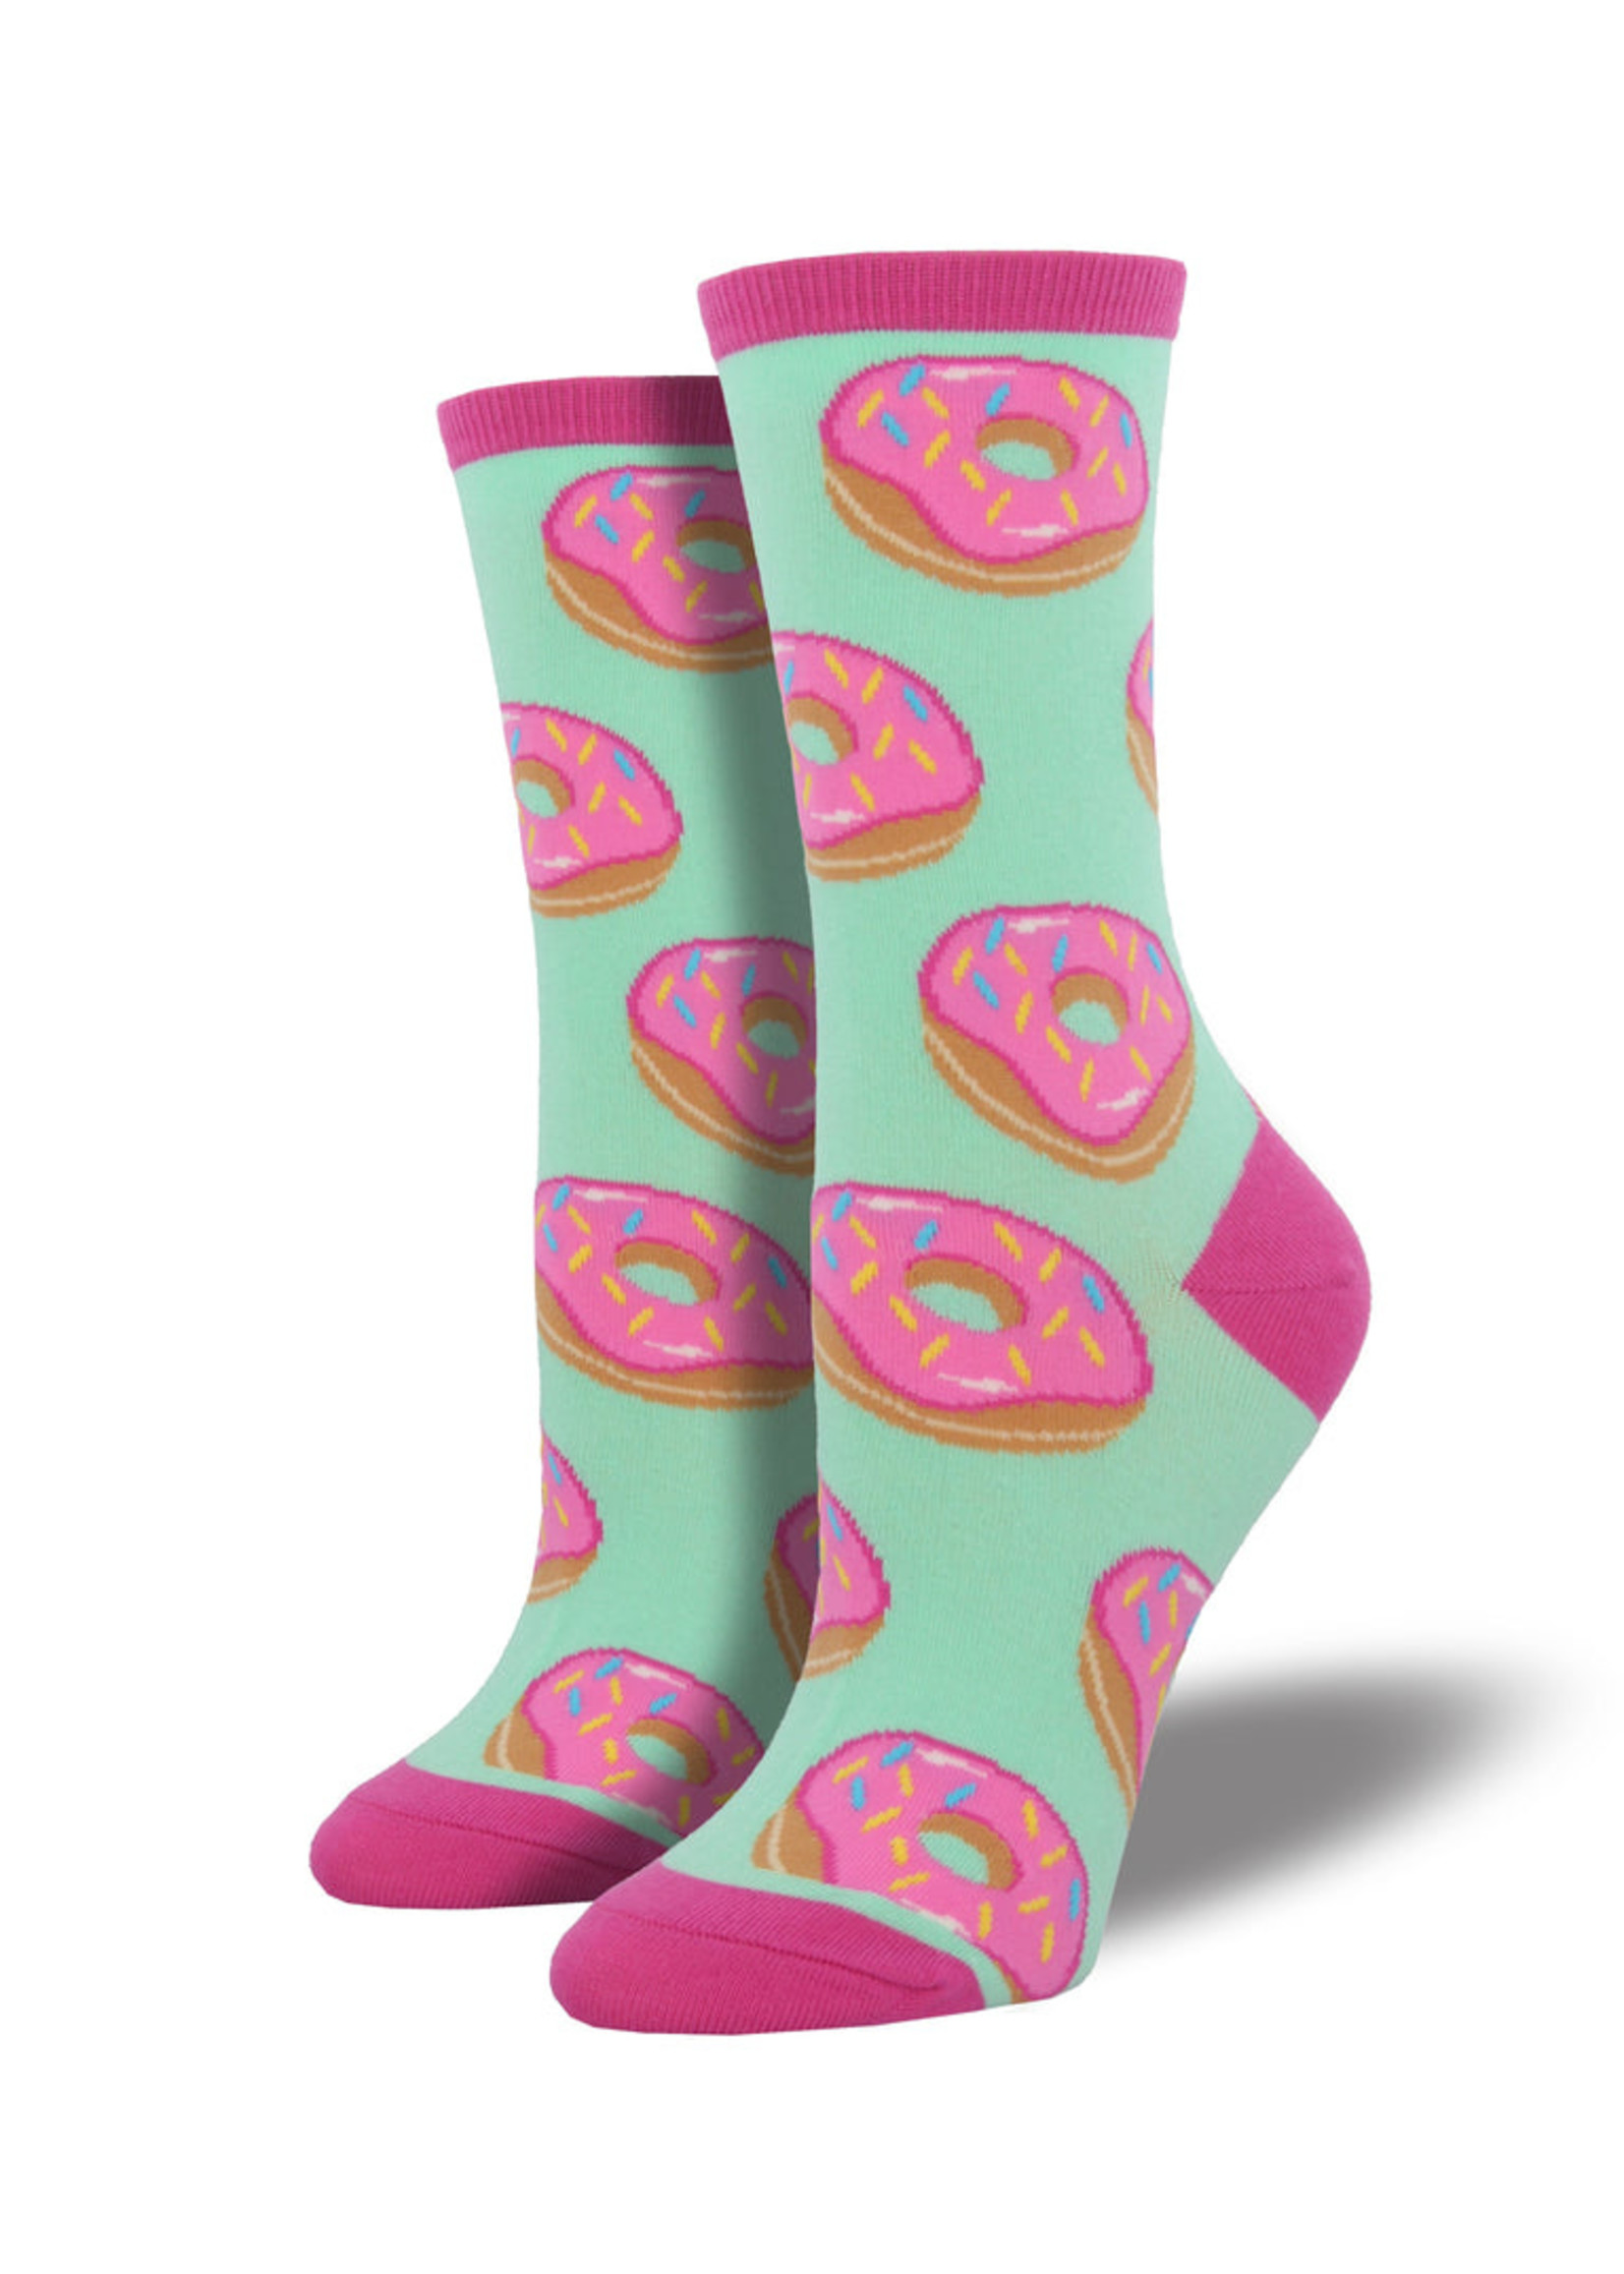 SOCK SMITH Chaussette DONUTS-Femme